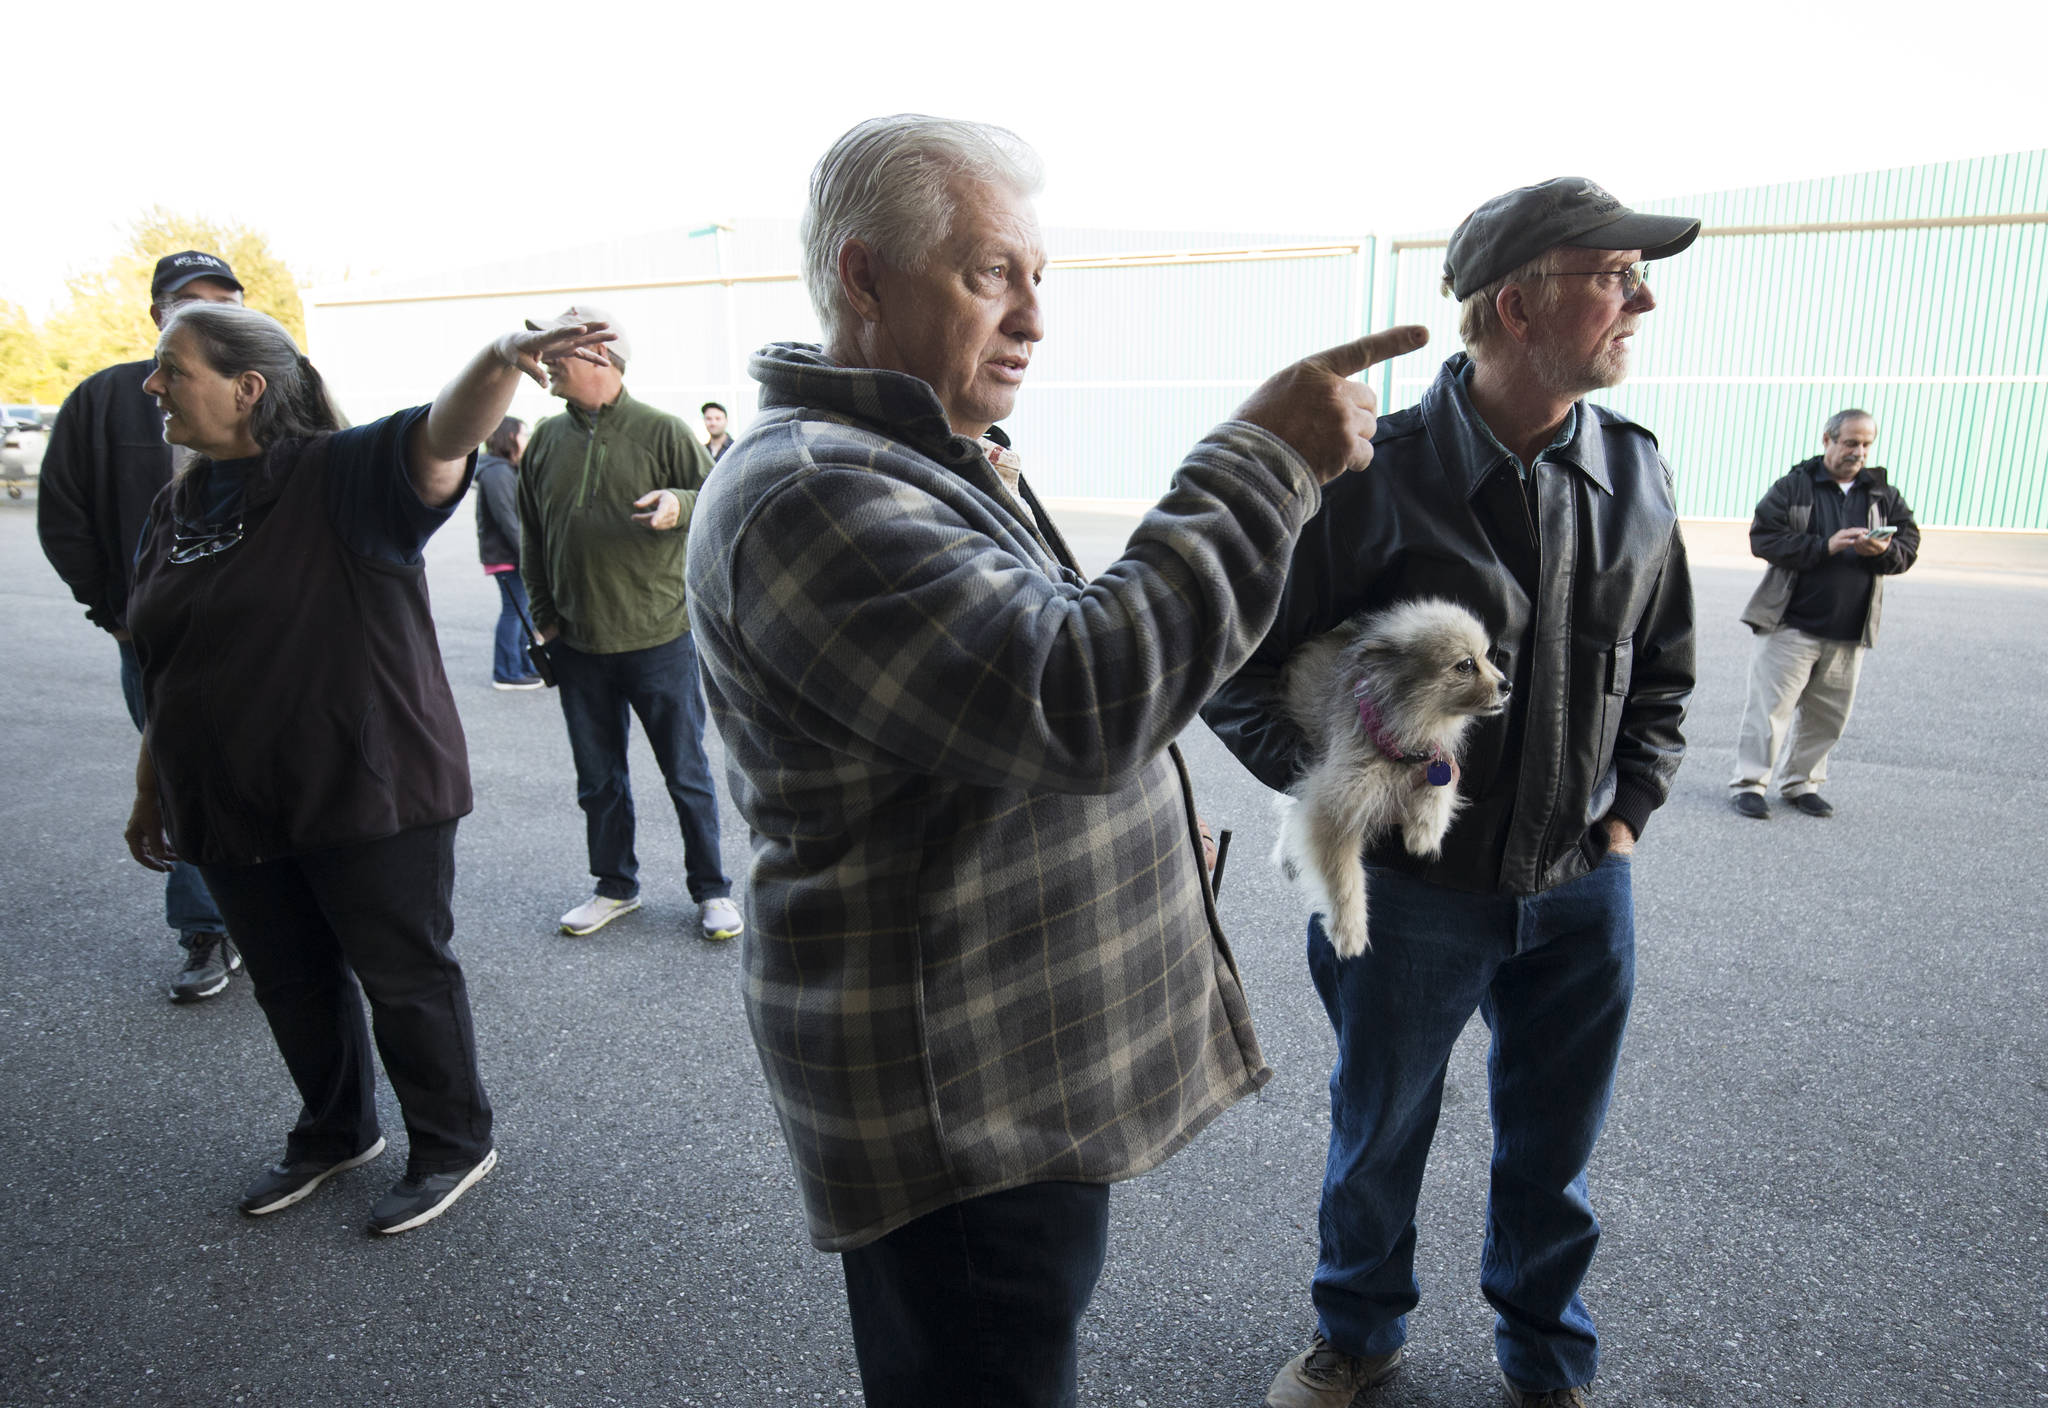 John Norman (center) explains which way pilot Ron Fowler, holding his dog, will take Norman’s replica of the Spirit of St. Louis out for its first flight at Arlington Municipal Airport on July 28. Heather Norman (left) explains the same to a friend. (Andy Bronson / The Herald)